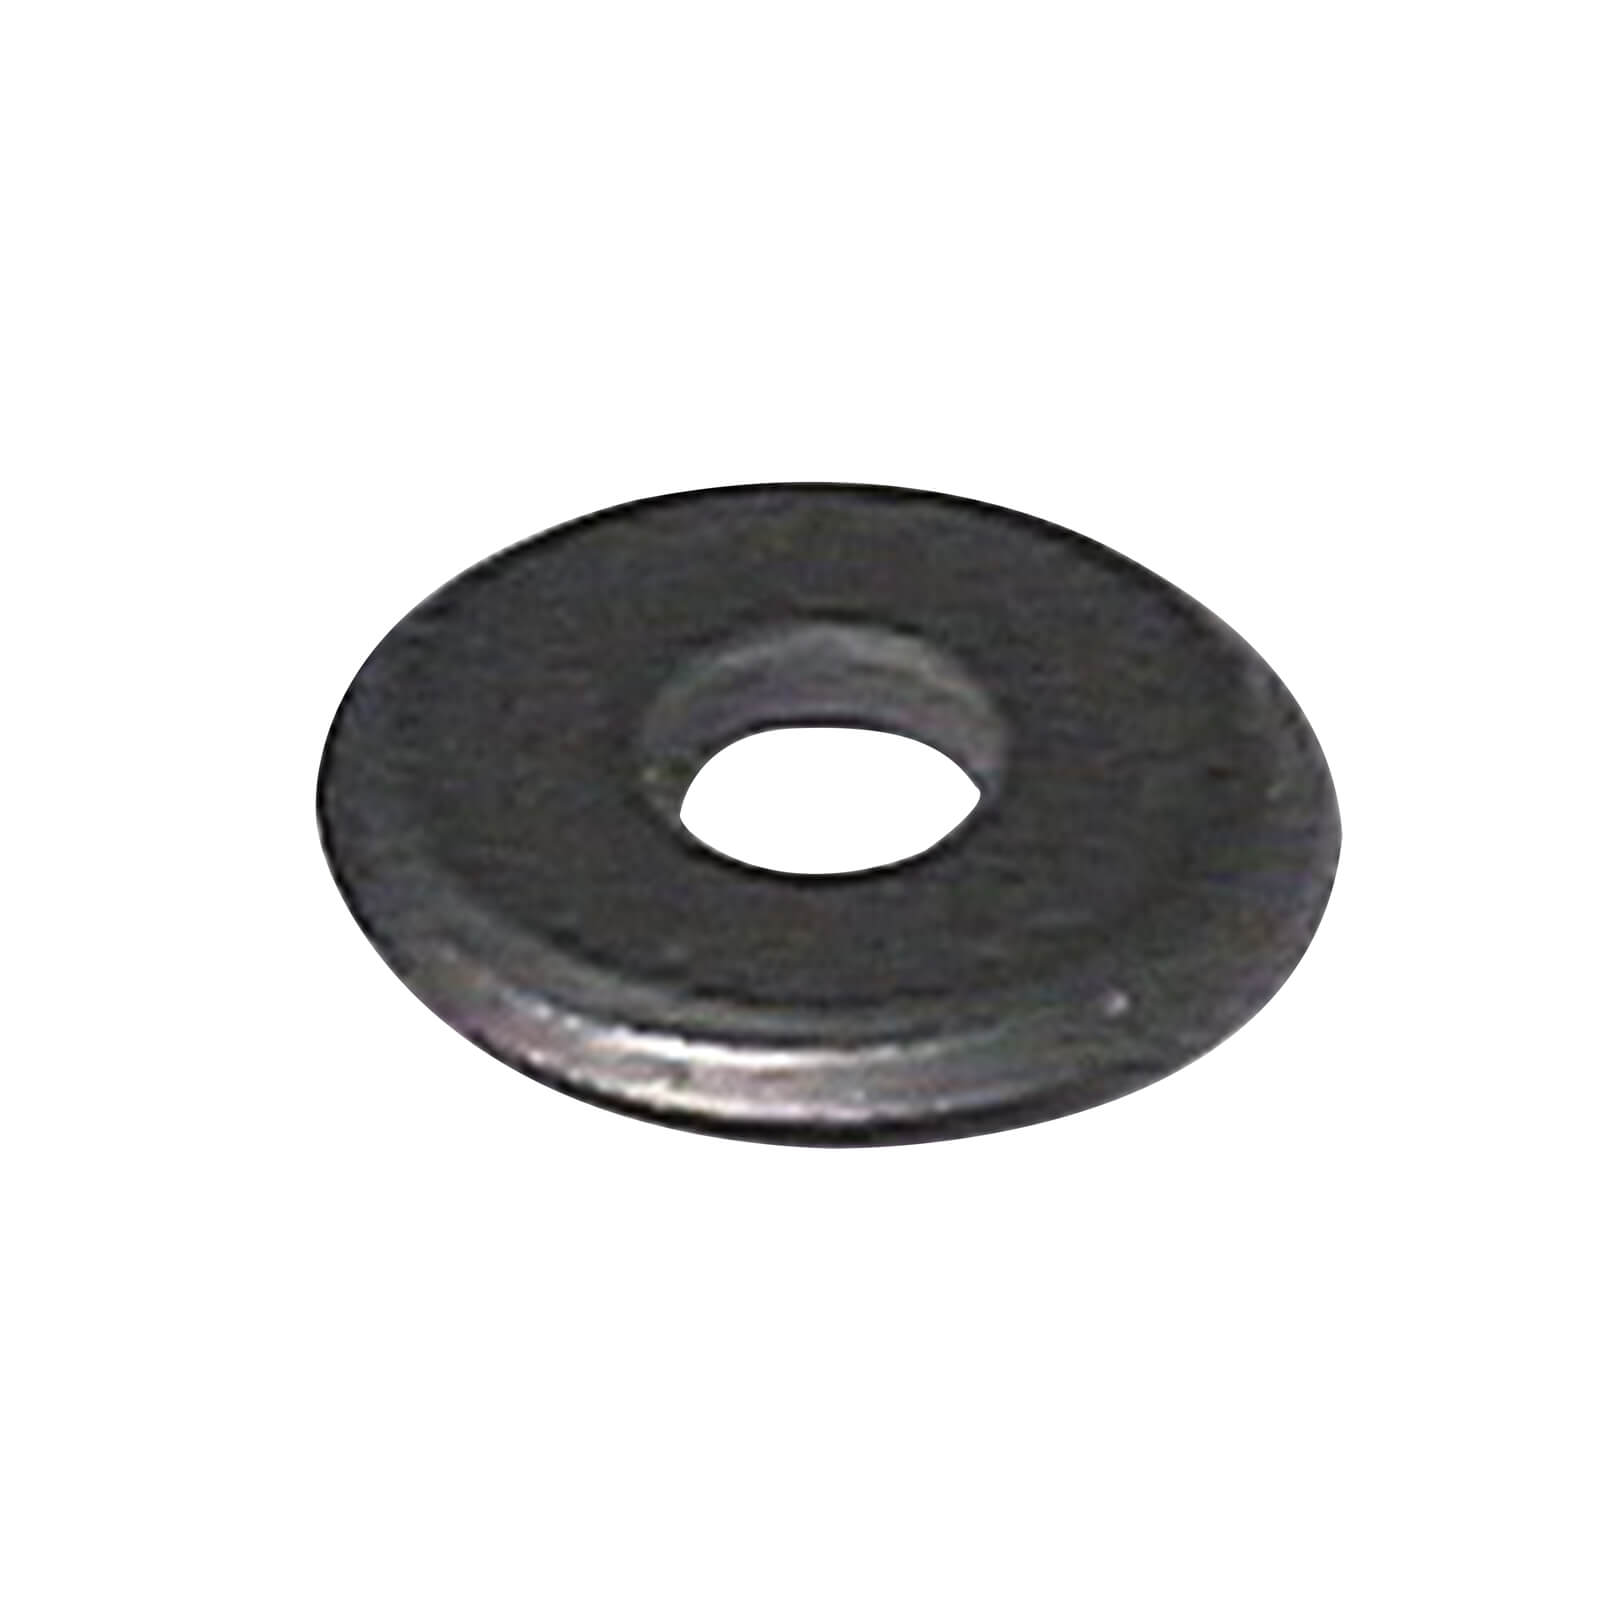 Photo of Vitrex Replacement Manual Cutter Wheel